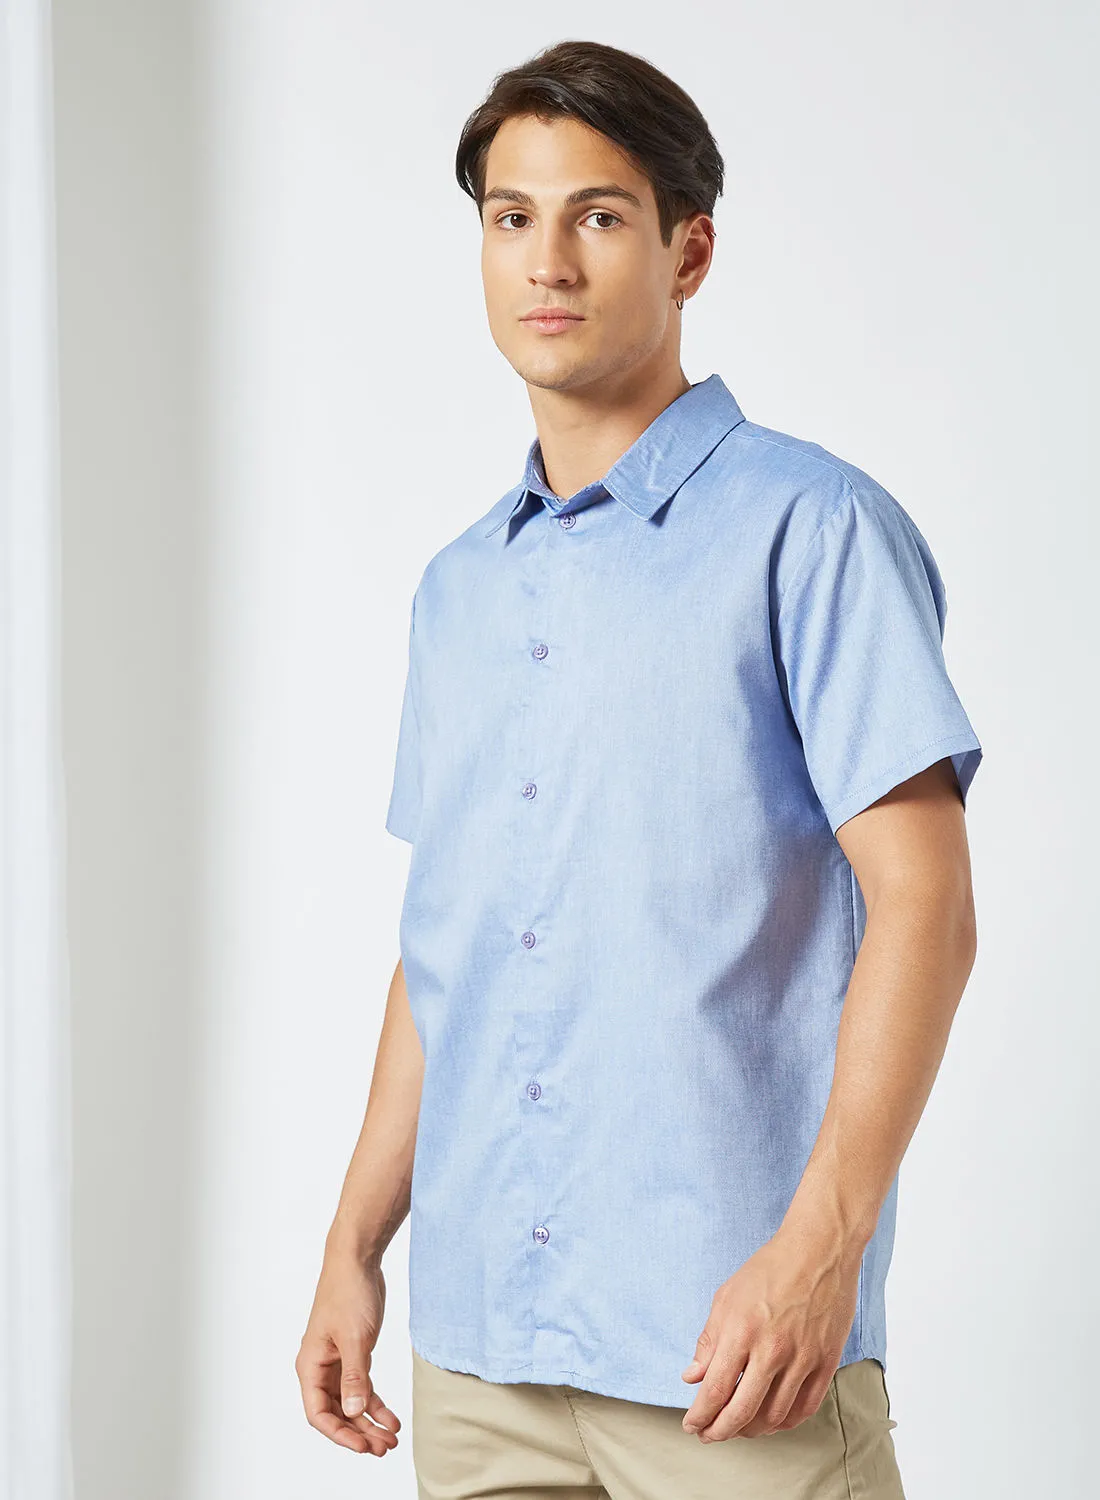 STATE 8 Oxford Chambray Short Sleeve Shirt Blue